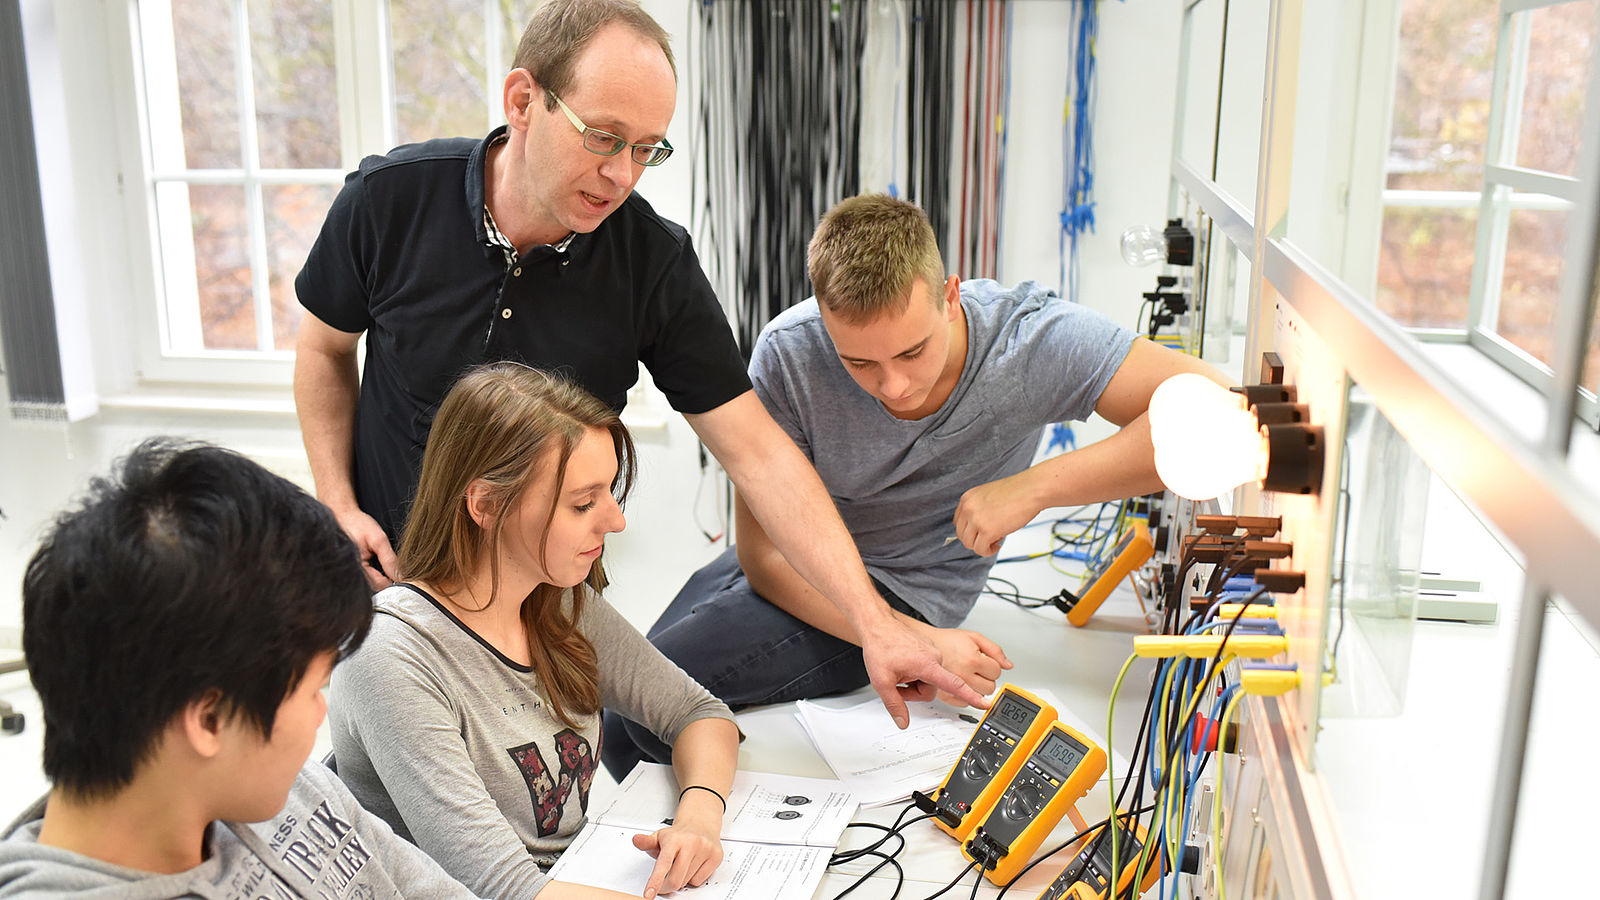 The study programme “Engineering Education in Electrical Engineering and Information Technology” ensures you are prepared in optimal fashion for future teaching activities.